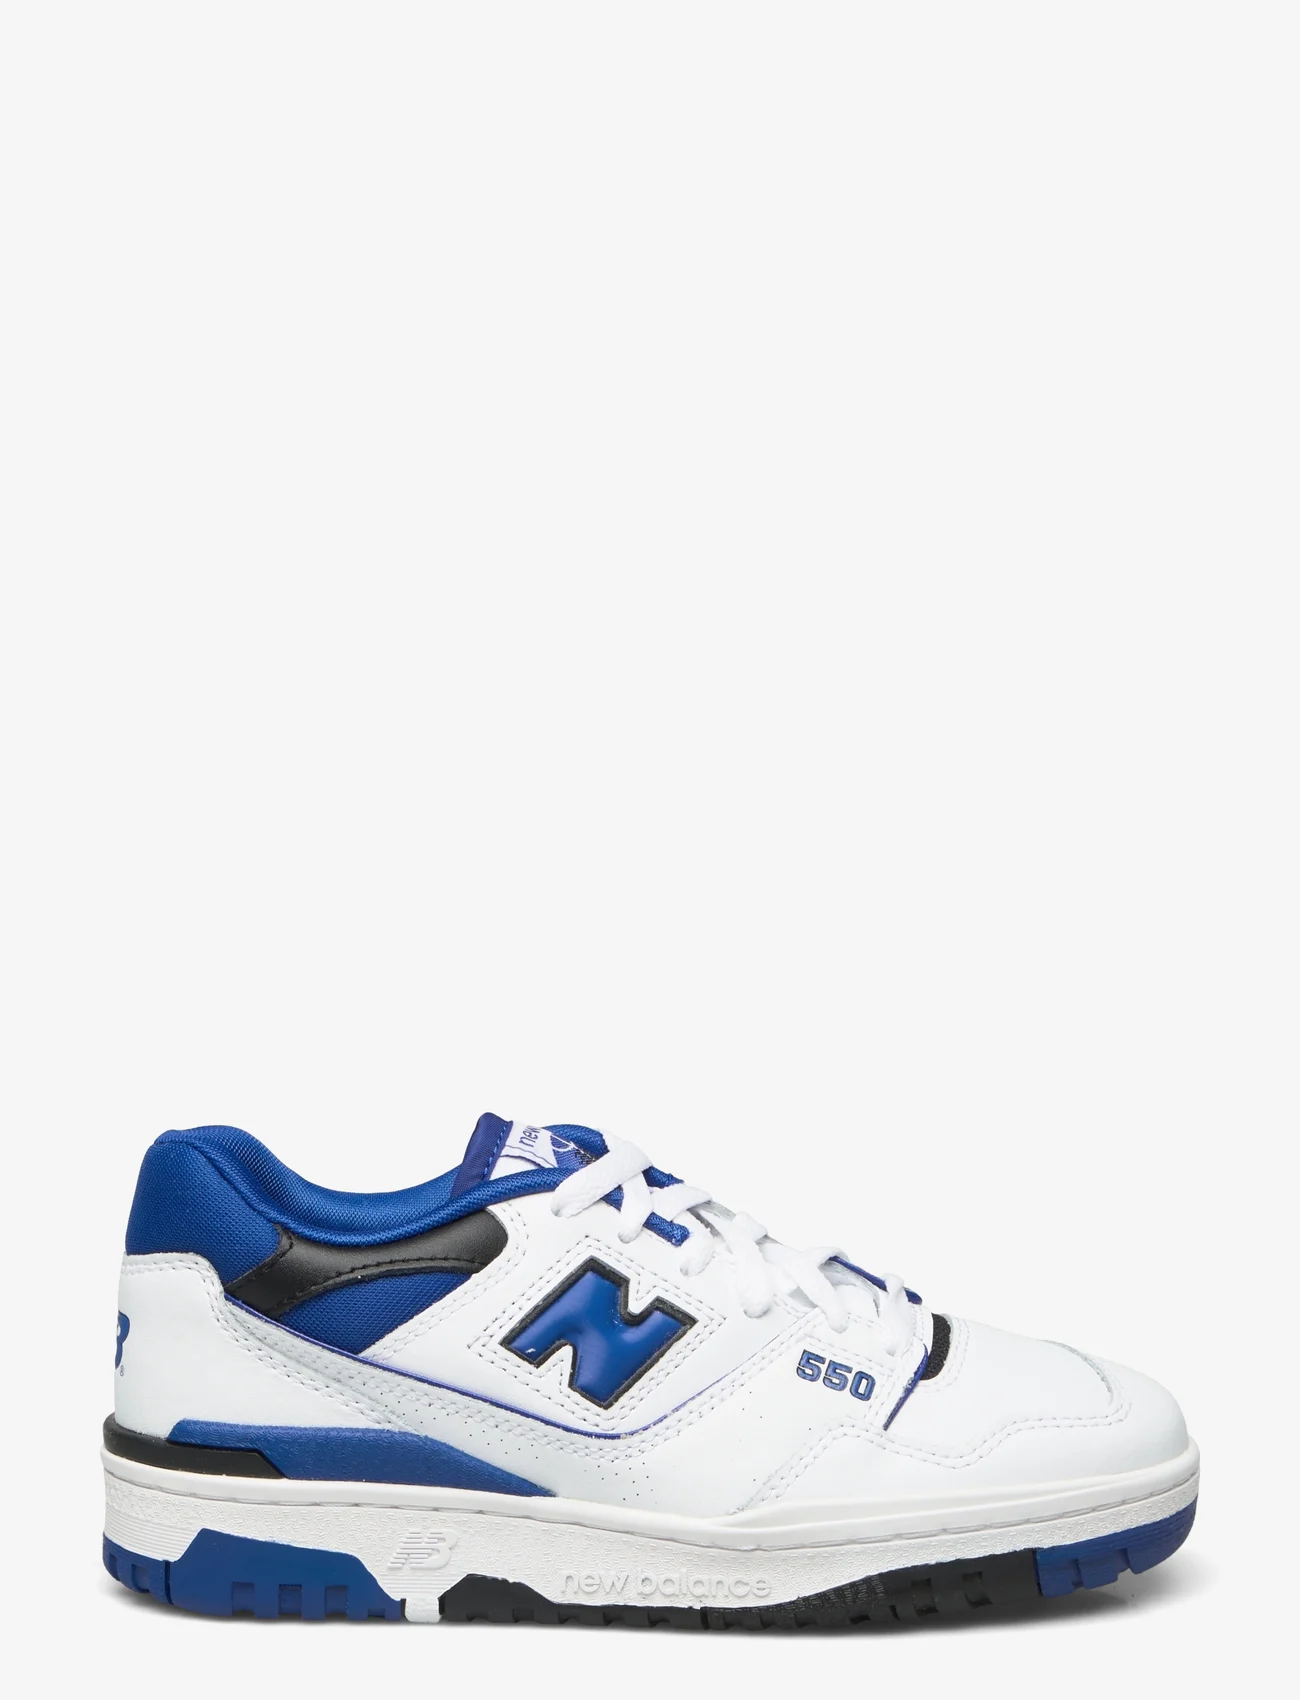 New Balance - New Balance BB550 - low top sneakers - white/royal - 1